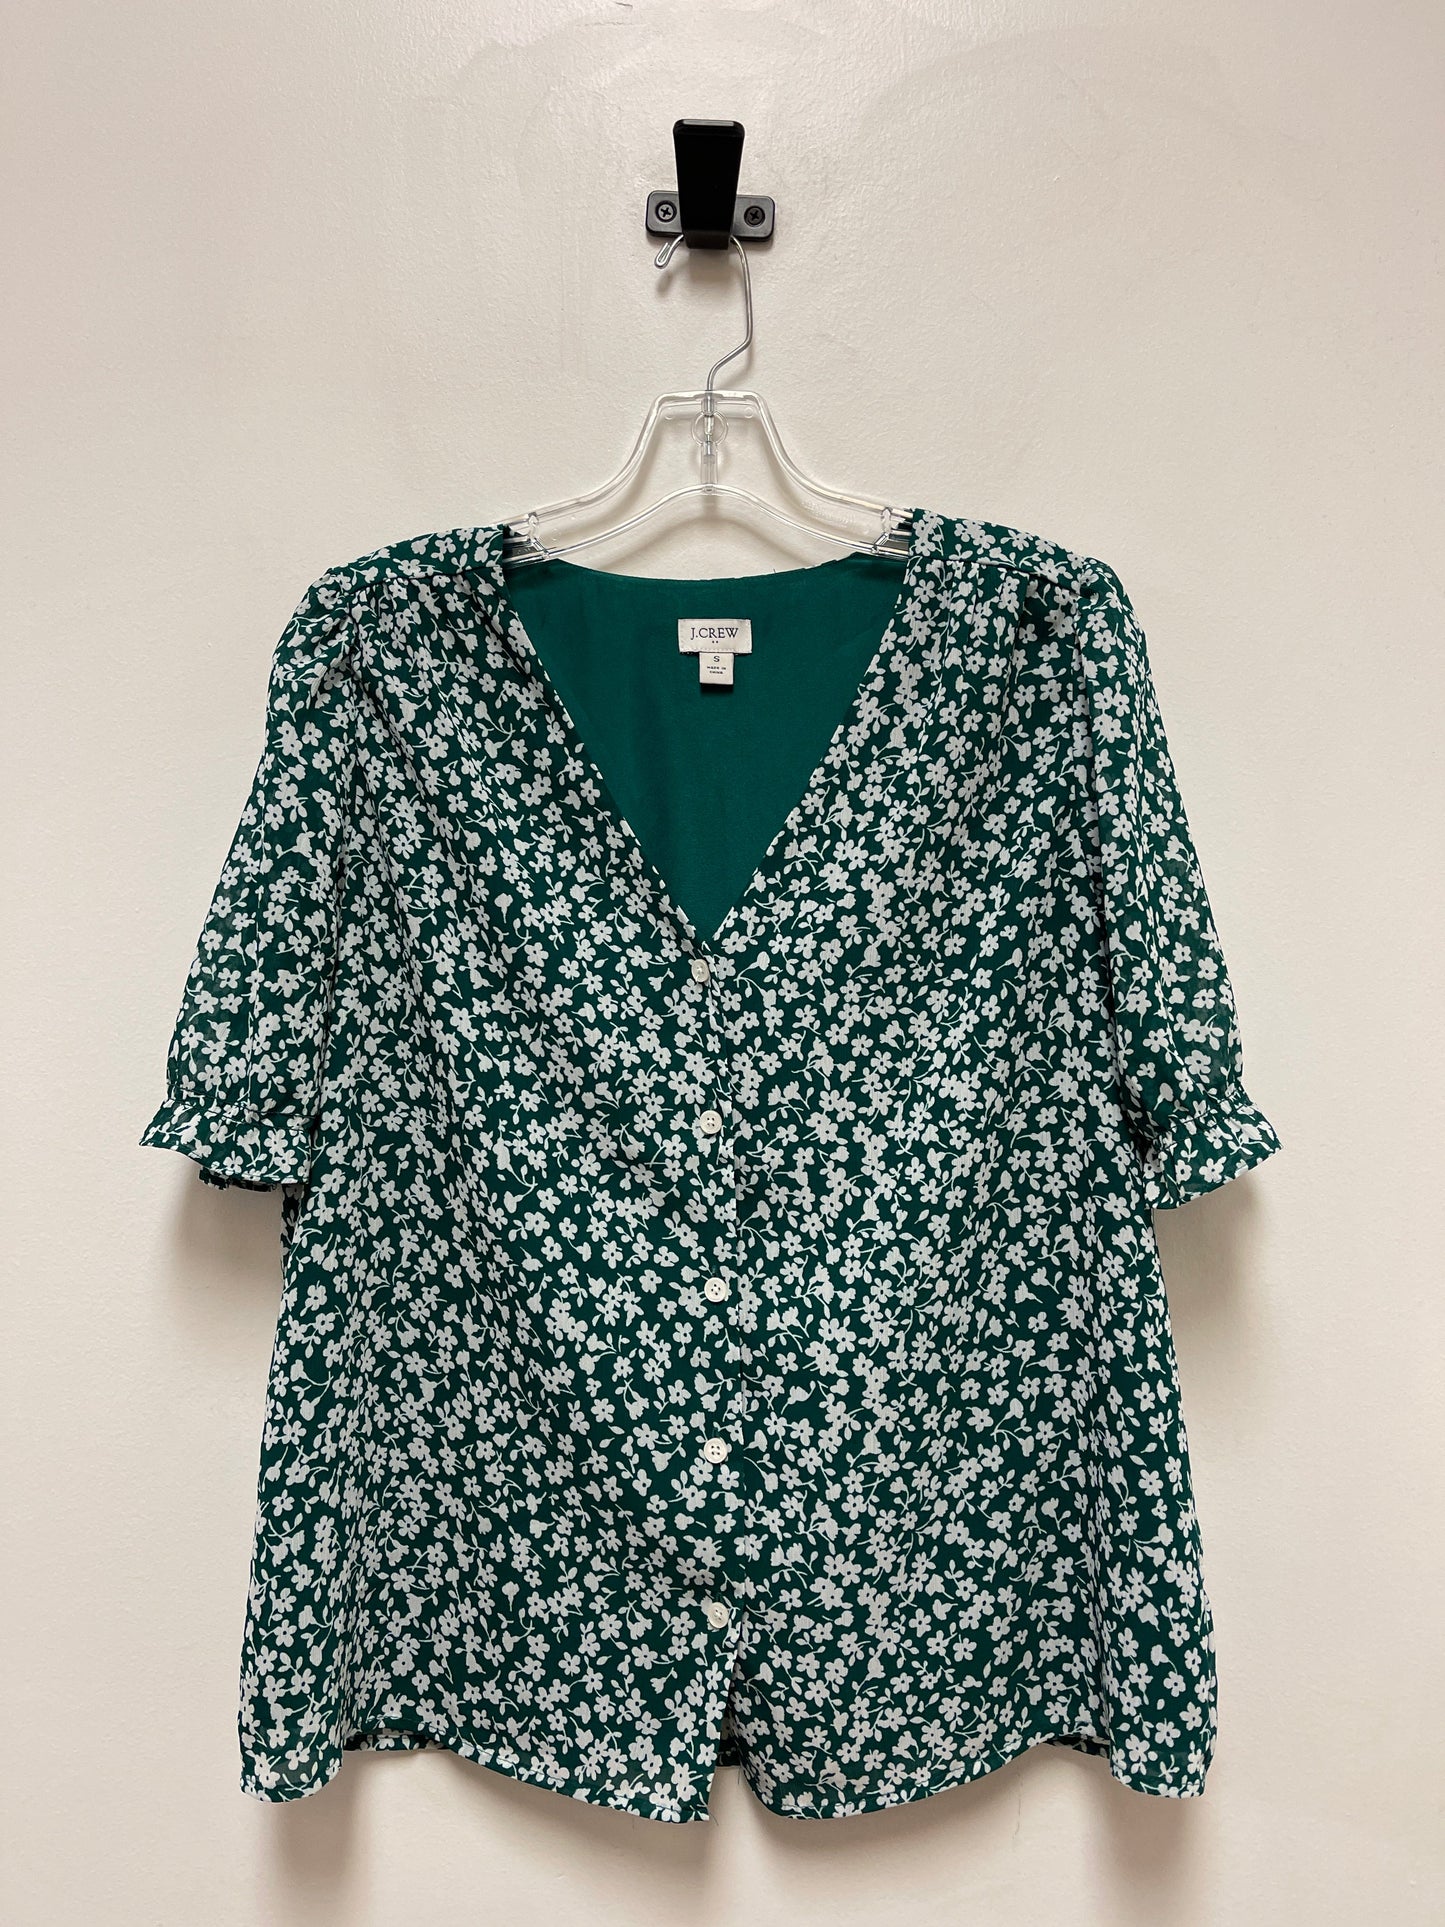 Green & White Top Short Sleeve J. Crew, Size S